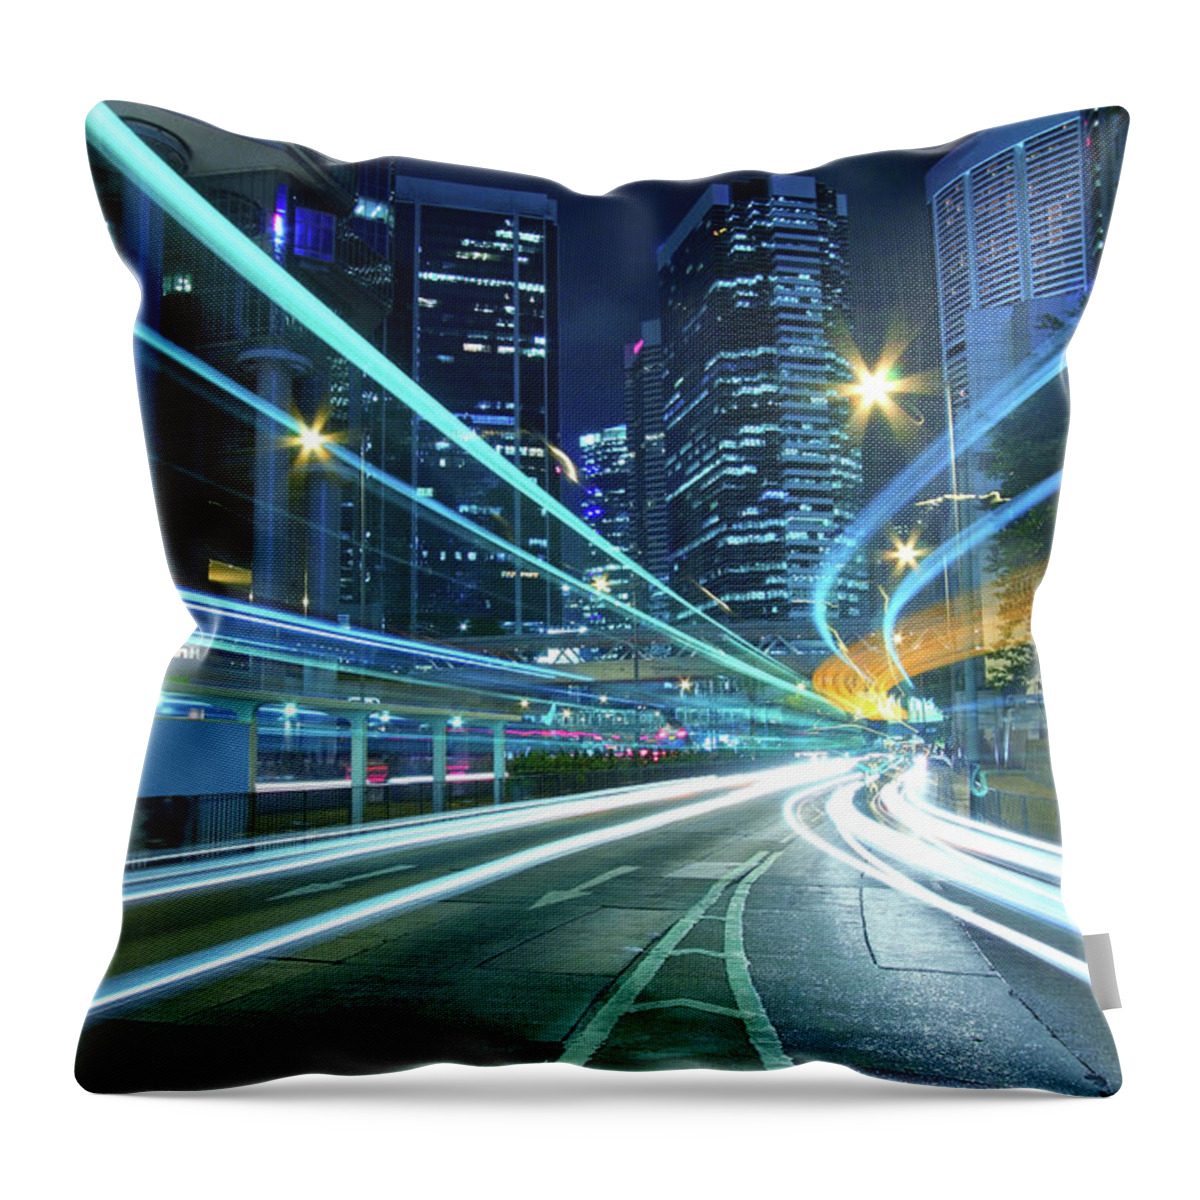 Downtown District Throw Pillow featuring the photograph Traffic In Downtown Of Hong Kong by Jess Yu